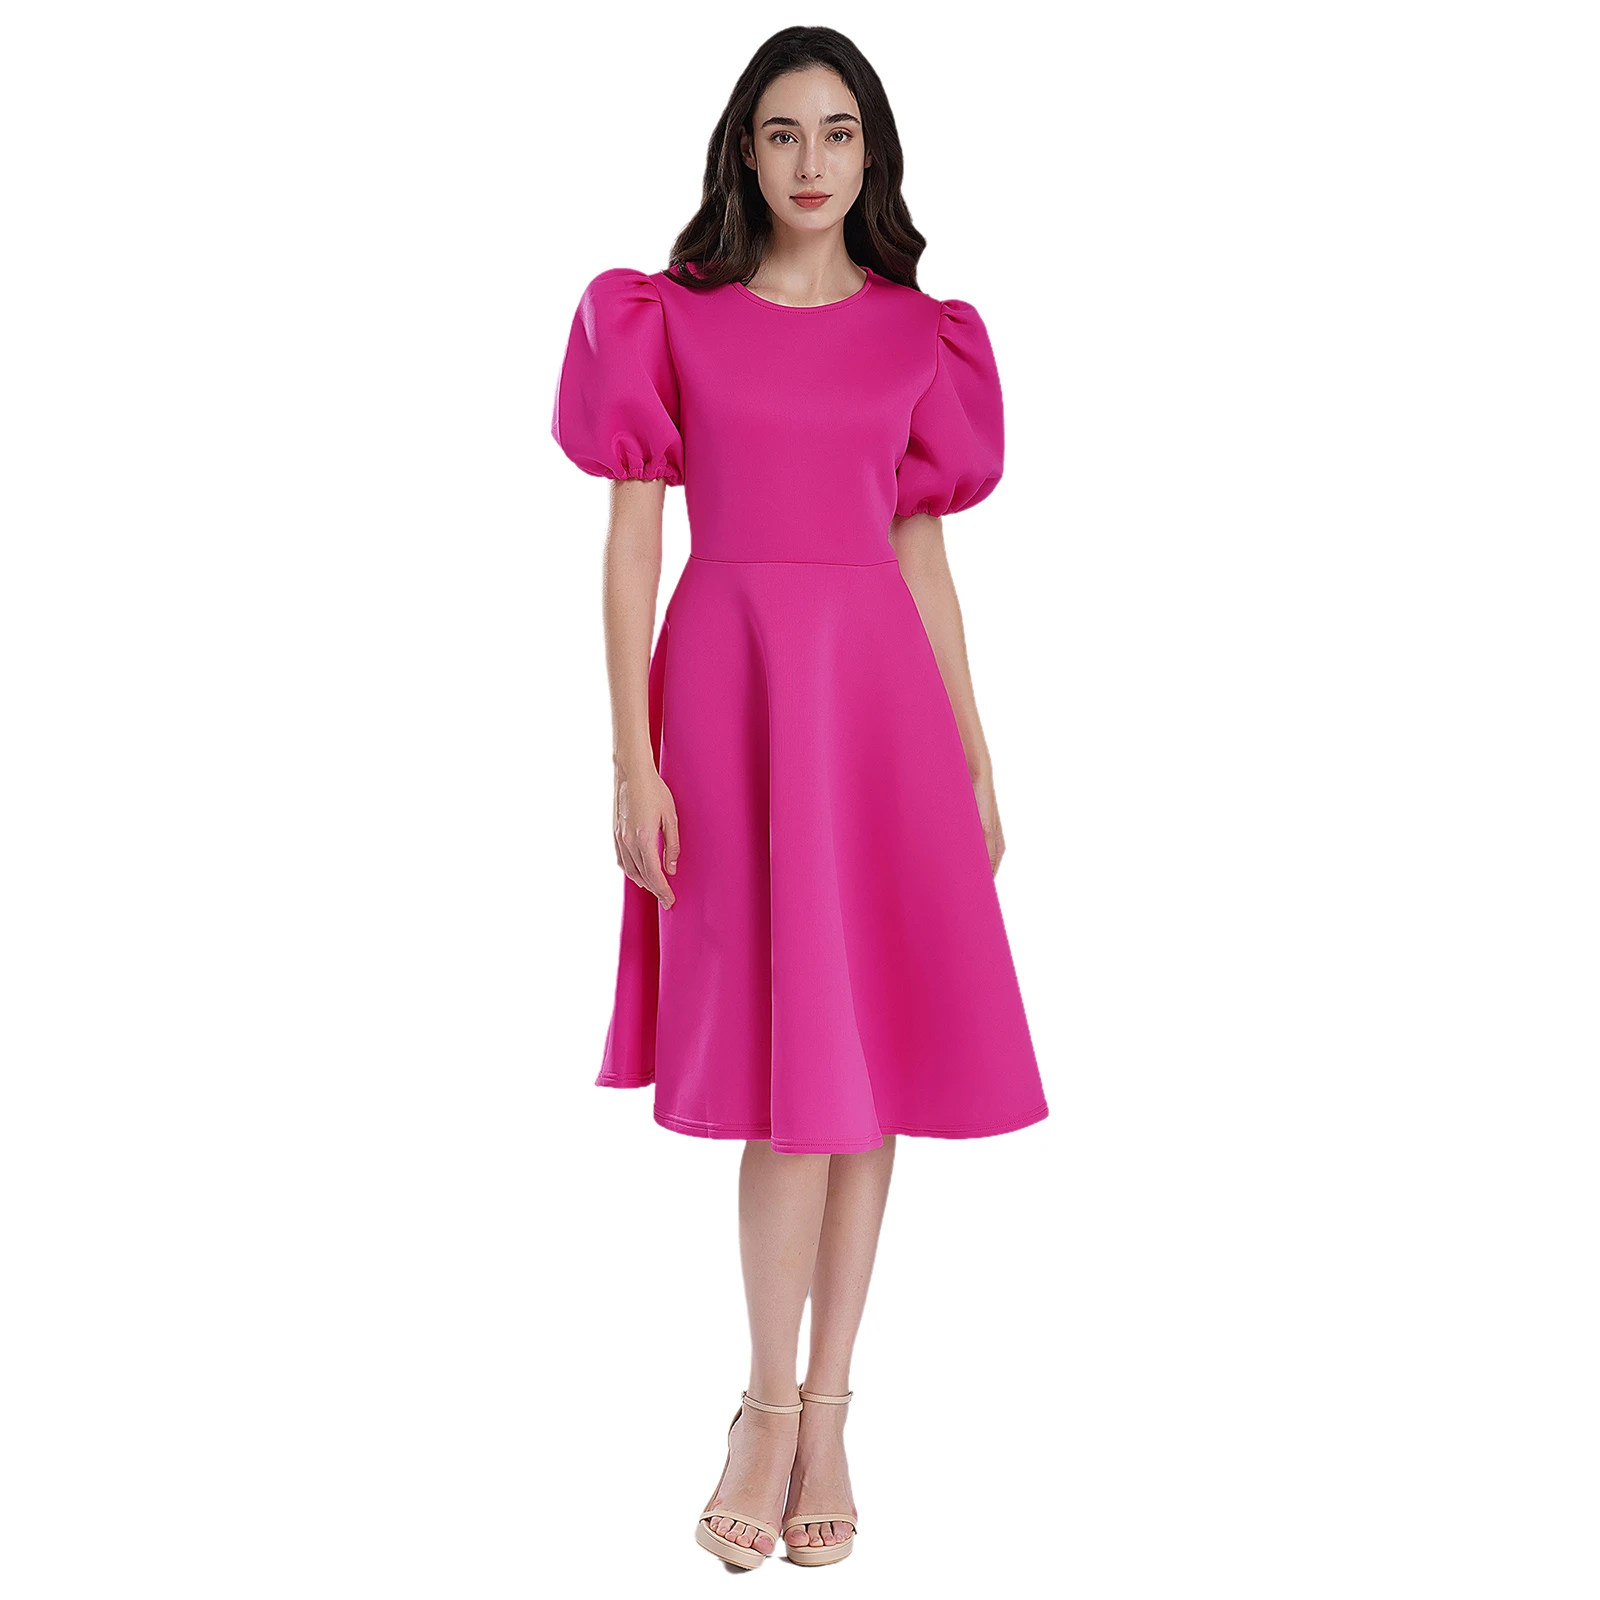 

Elegant Womens Puff Sleeve Dress Fashion Solid Color Round Neck A-Line Flared Dresses for Evening Wedding Party Banquet